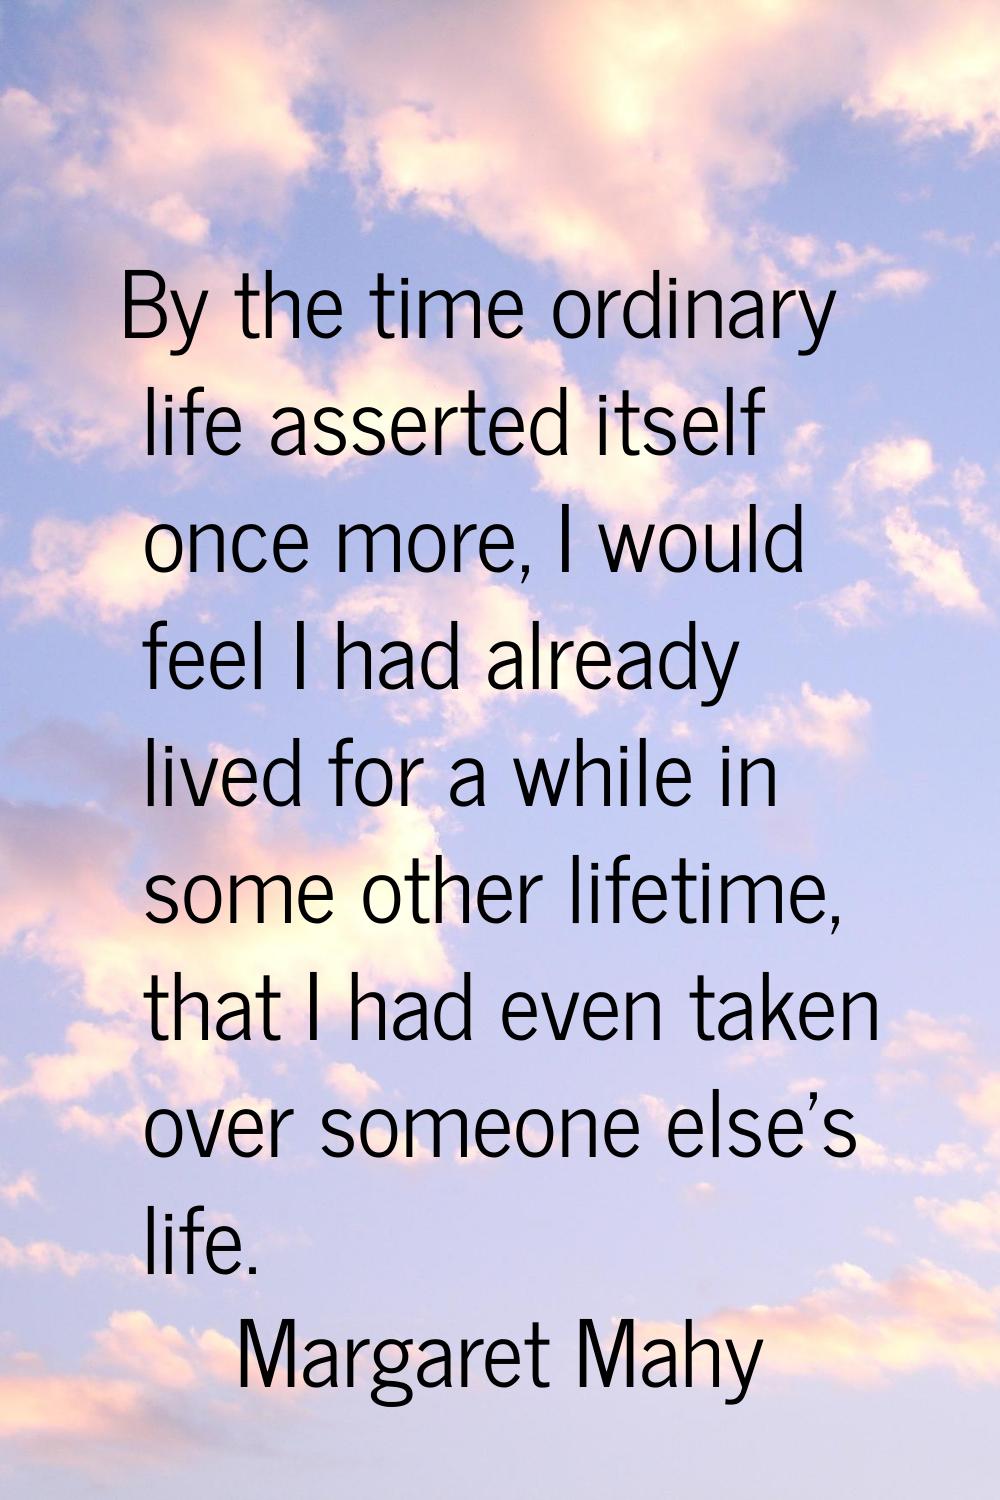 By the time ordinary life asserted itself once more, I would feel I had already lived for a while i